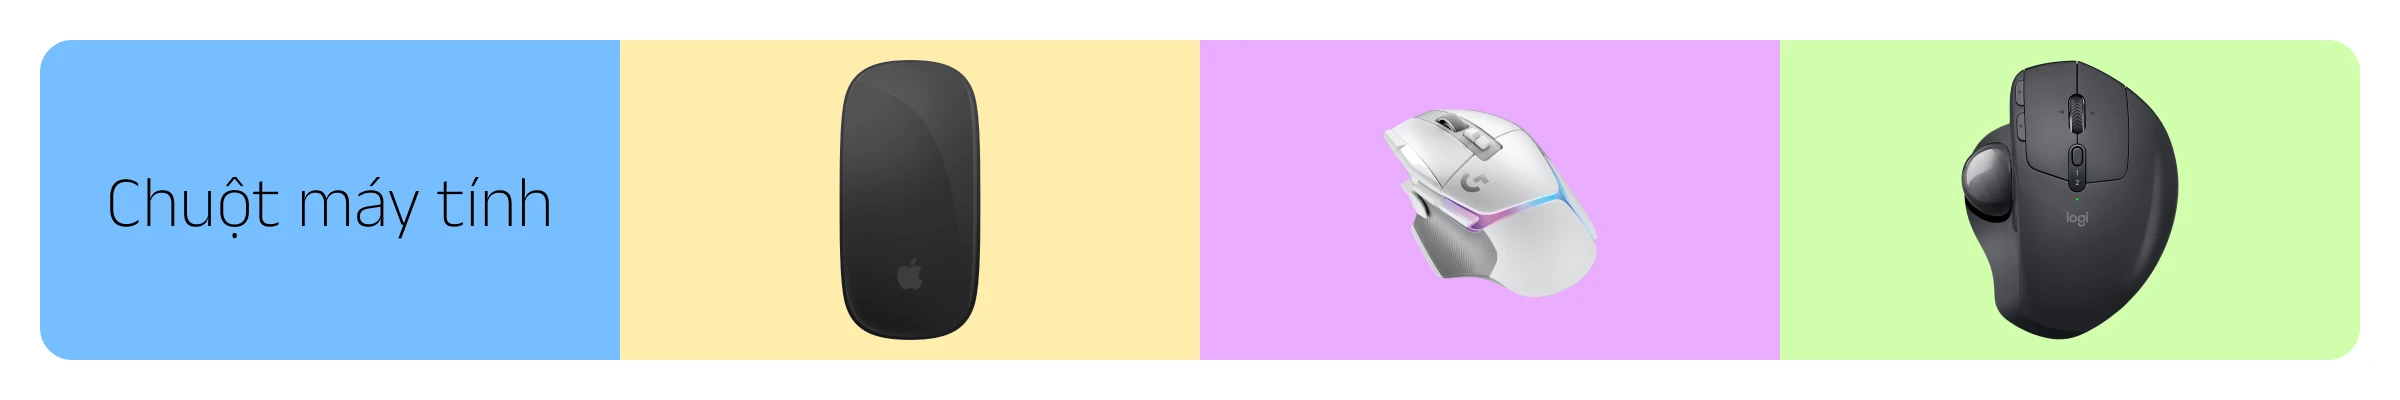 Mouse banner